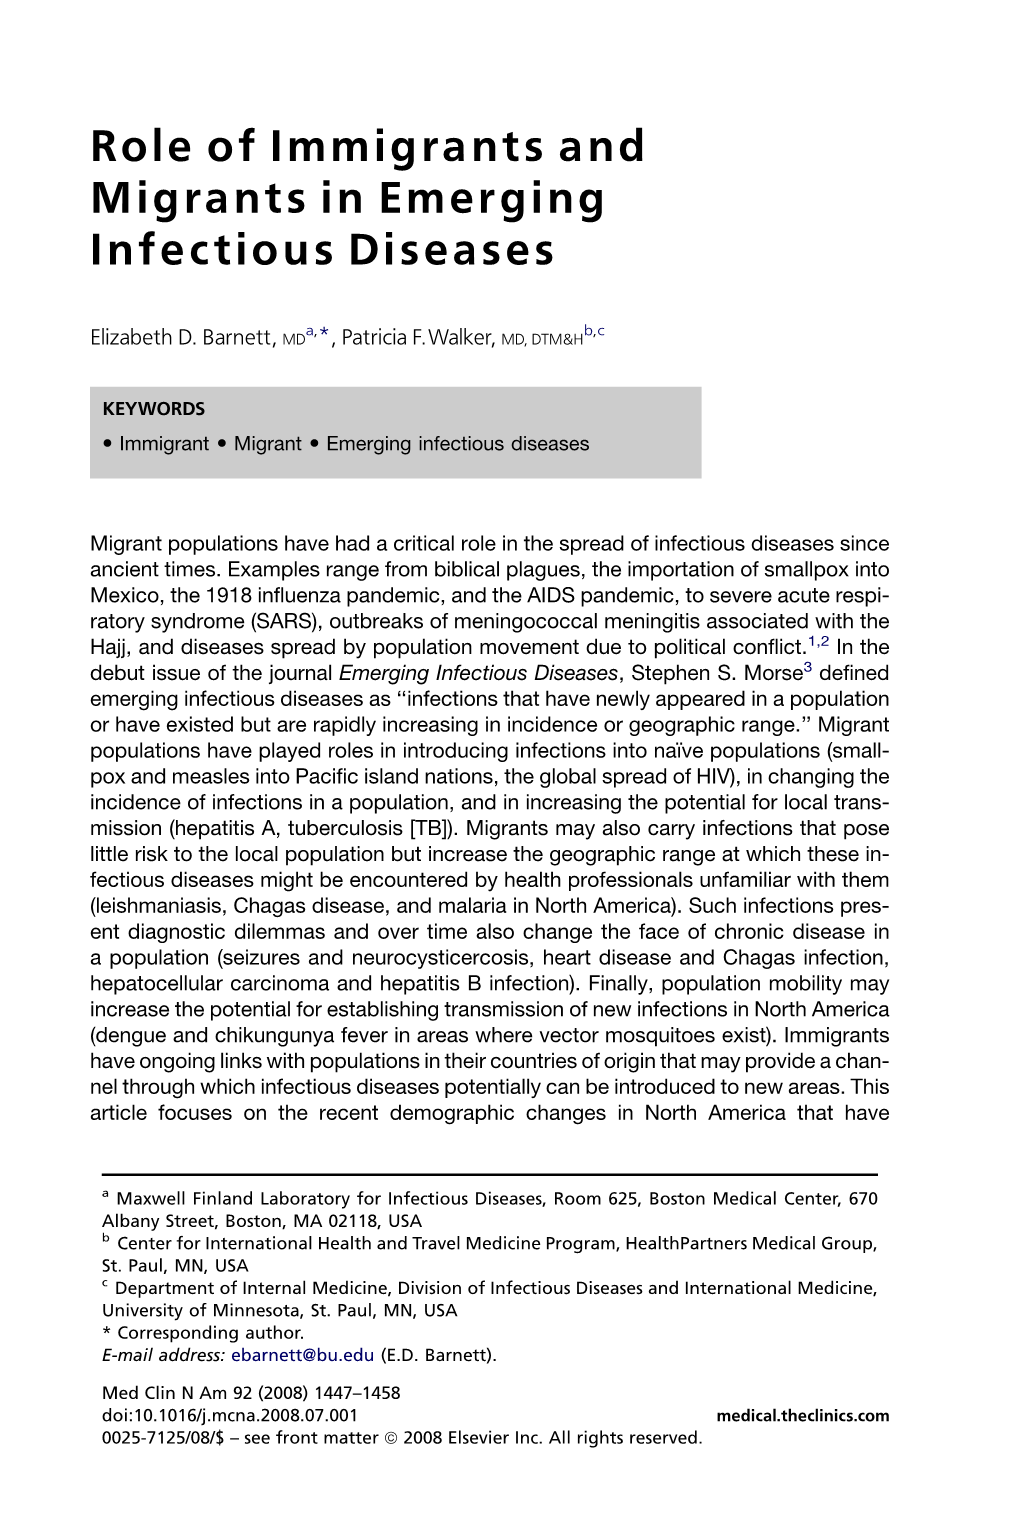 Role of Immigrants and Migrants in Emerging Infectious Diseases